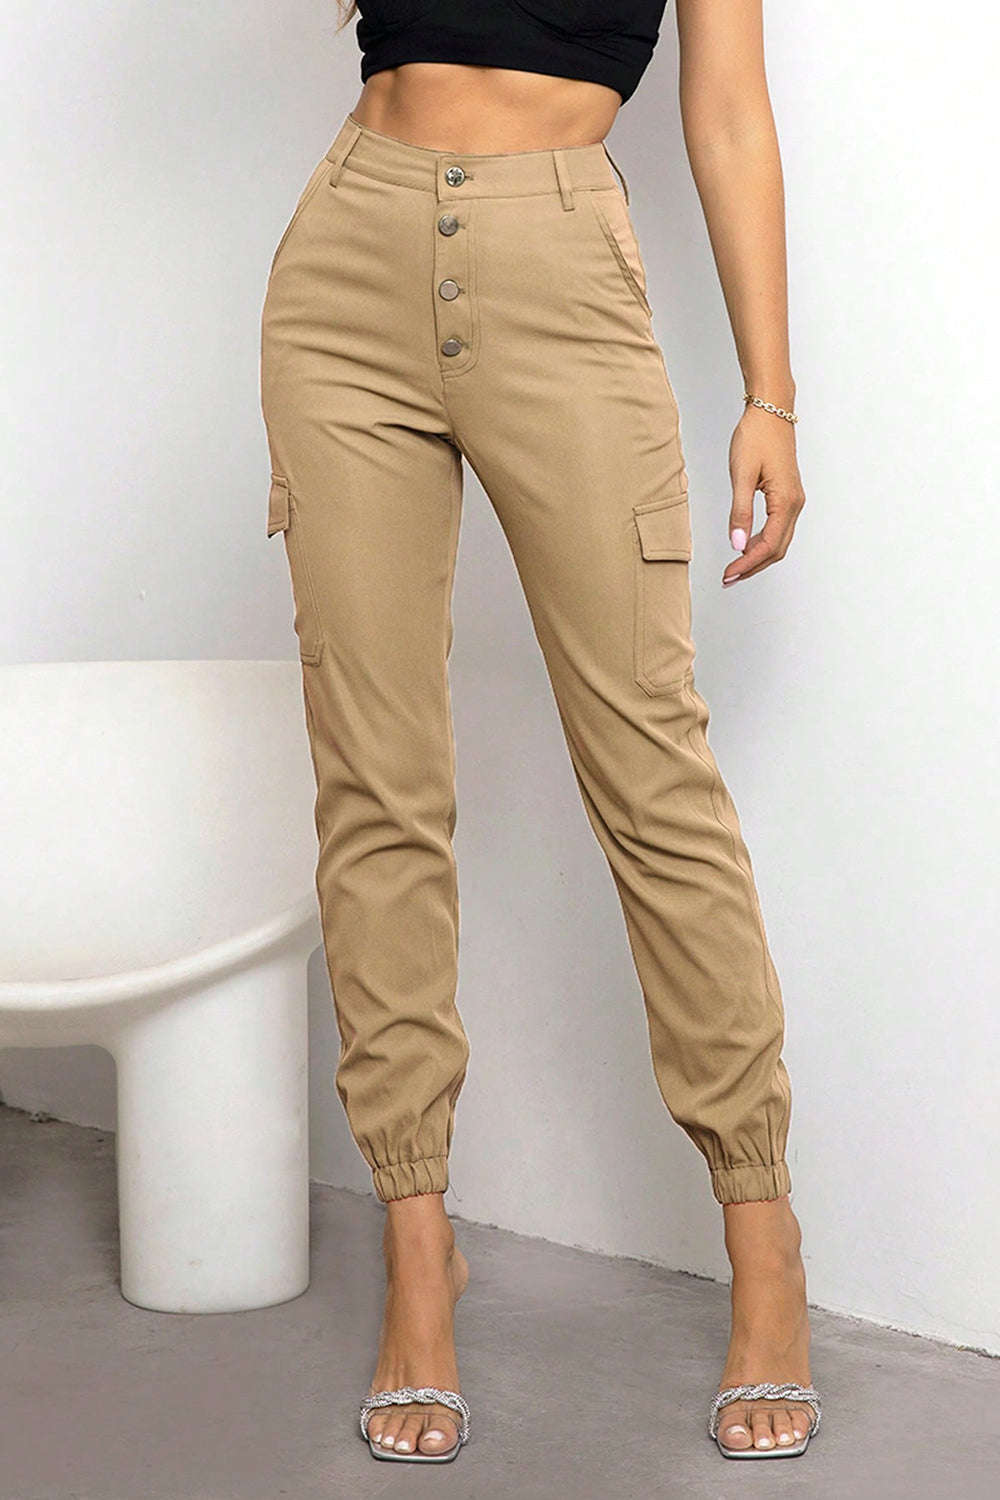 Black or Tan Button Fly Cargo Pants